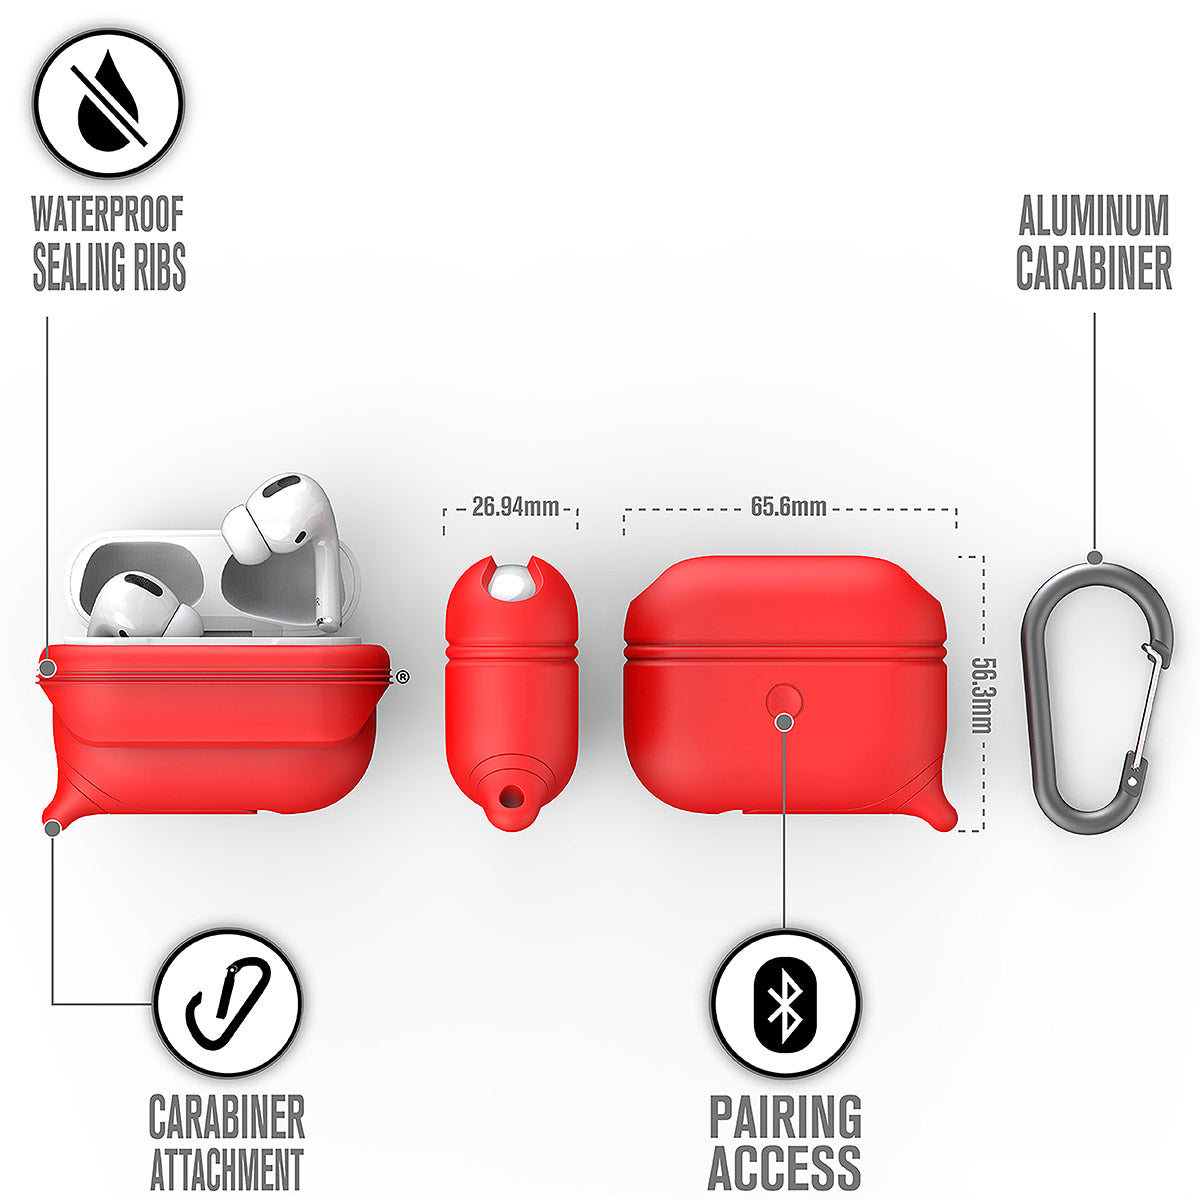 CATAPLAPDPRORED | catalyst airpods pro gen 2 1 waterproof case carabiner special edition red different views showing the sealing ribs carabiner attachment loop and pairing access text reads waterproof sealing ribs aluminum carabiner carabiner attachment pairing access